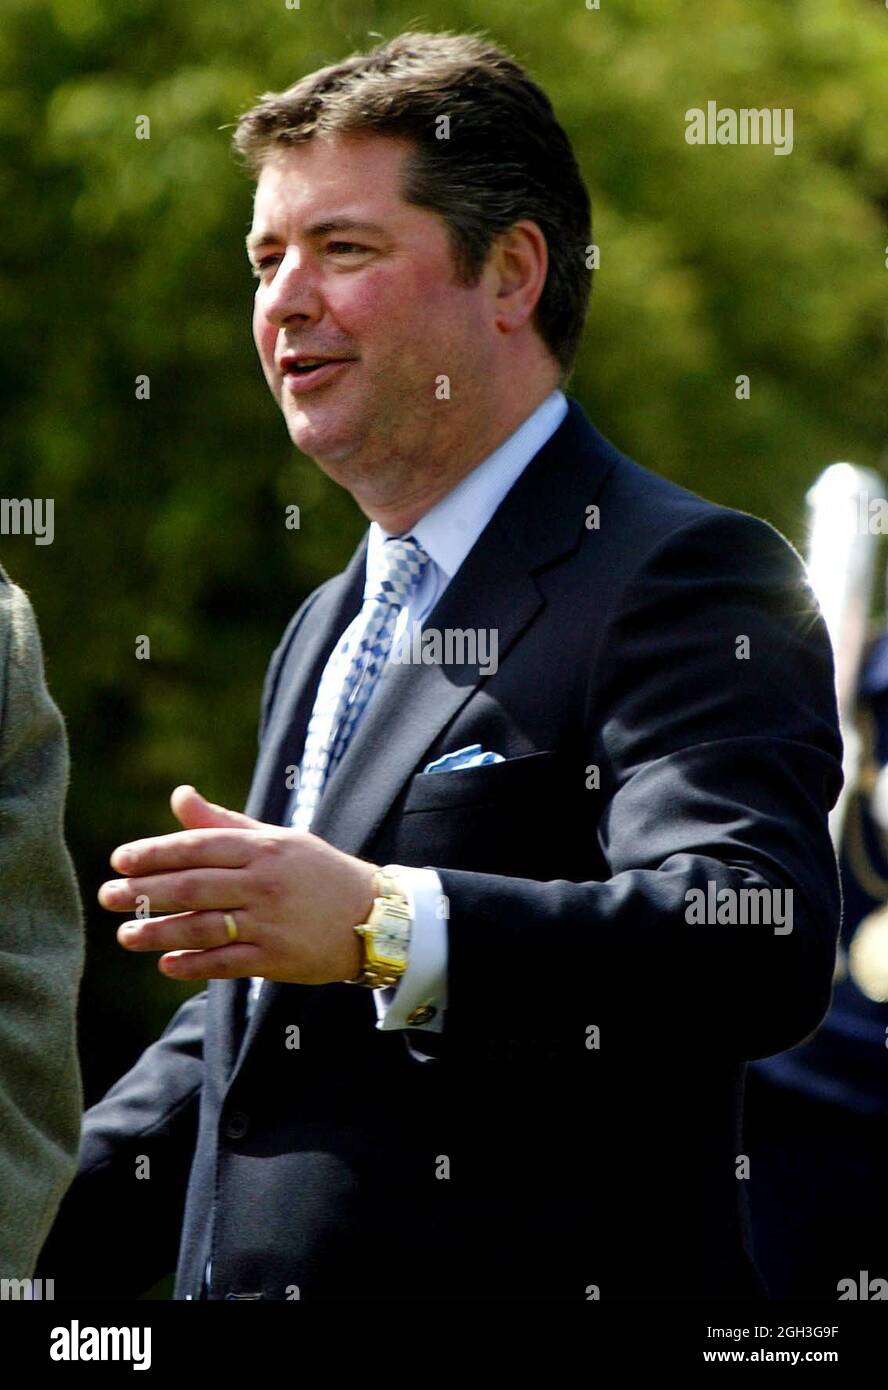 File photo dated 01/06/04 of Michael Fawcett, a former assistant valet to Prince Charles, who has stepped down as chief executive of The Prince's Foundation amid claims reported by Sunday newspapers about honours relating to Saudi businessman Mahfouz Marei Mubarak bin Mahfouz. Issue date: Sunday September 5, 2021. Stock Photo